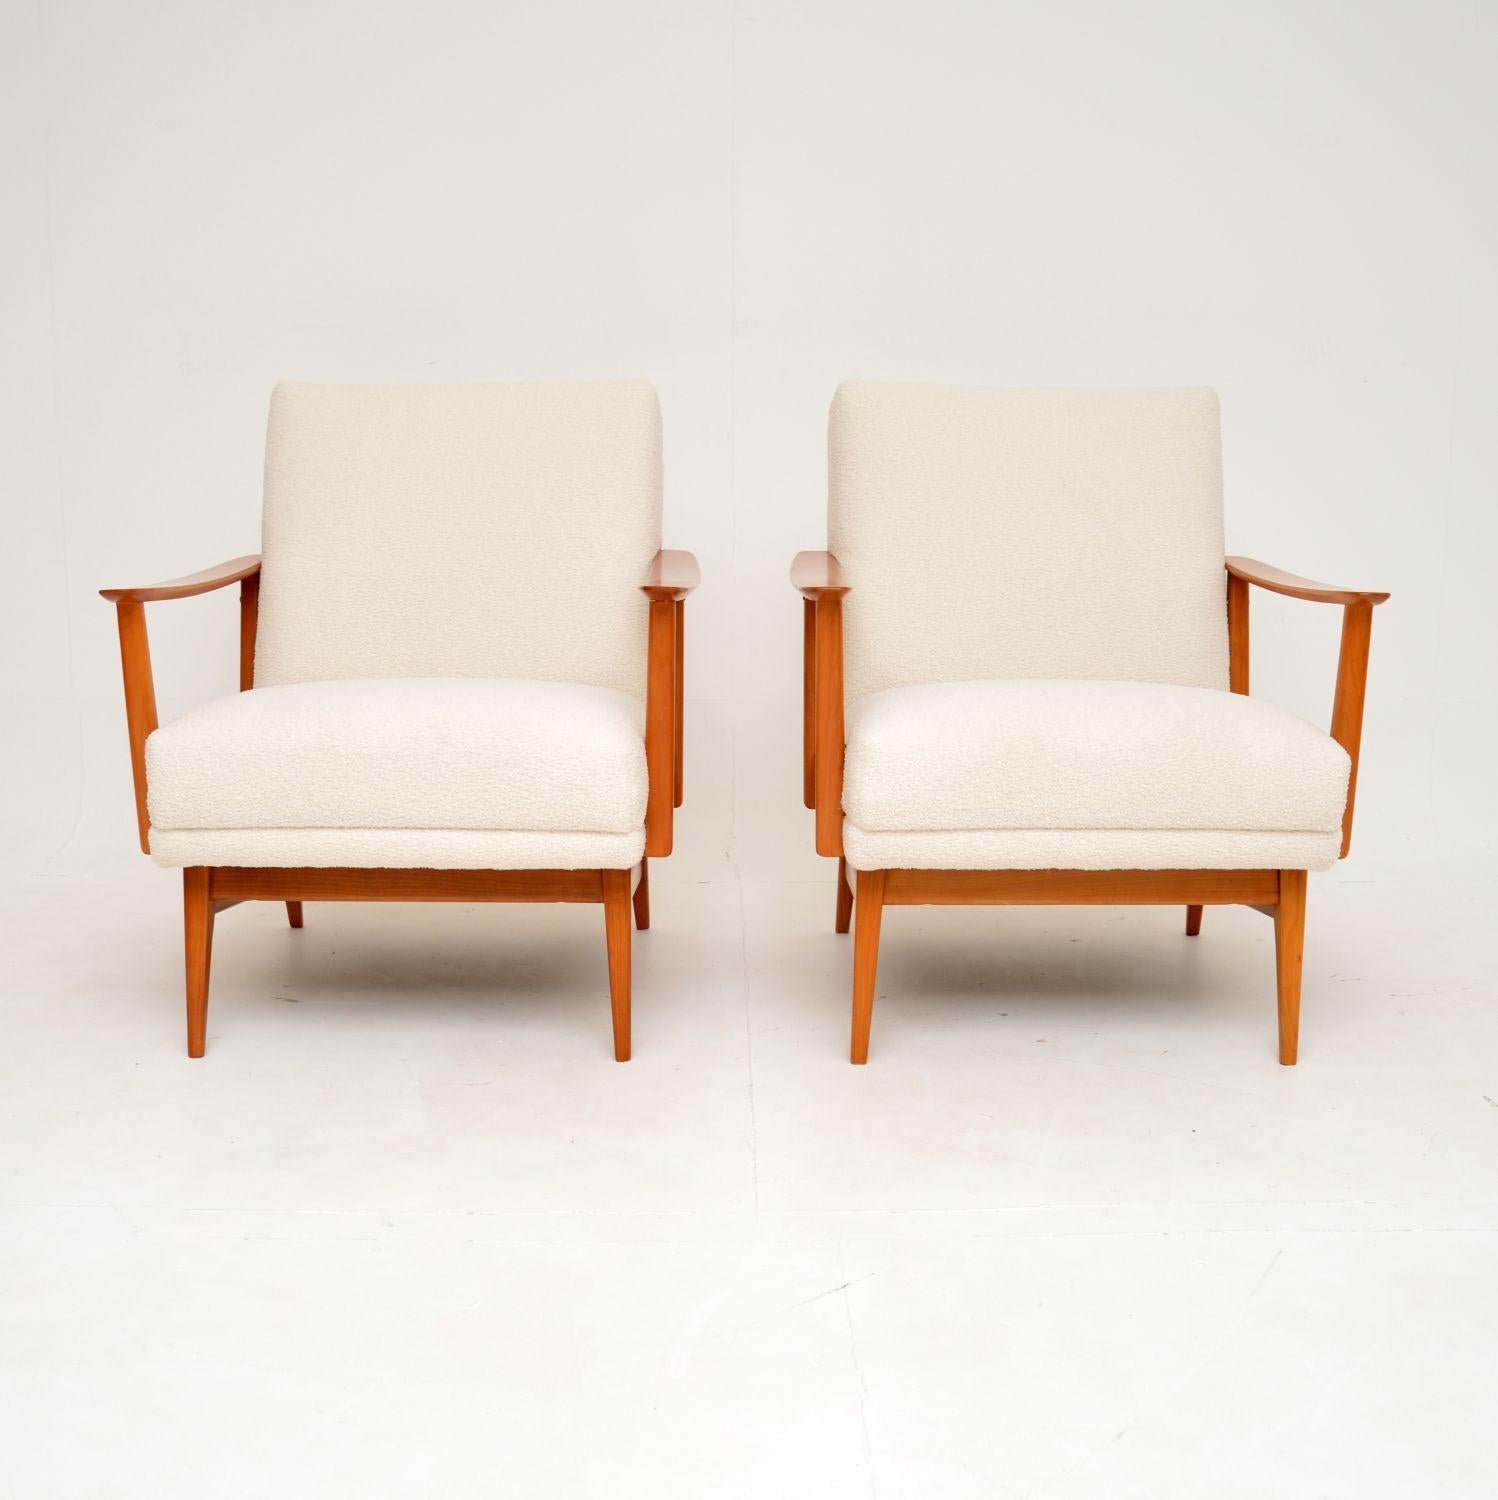 A very stylish and extremely comfortable pair of vintage French armchairs. They were recently imported from France, and they date from the 1960’s.

The quality is amazing, with beautifully crafted cherry wood frames. The open arms have a slender yet